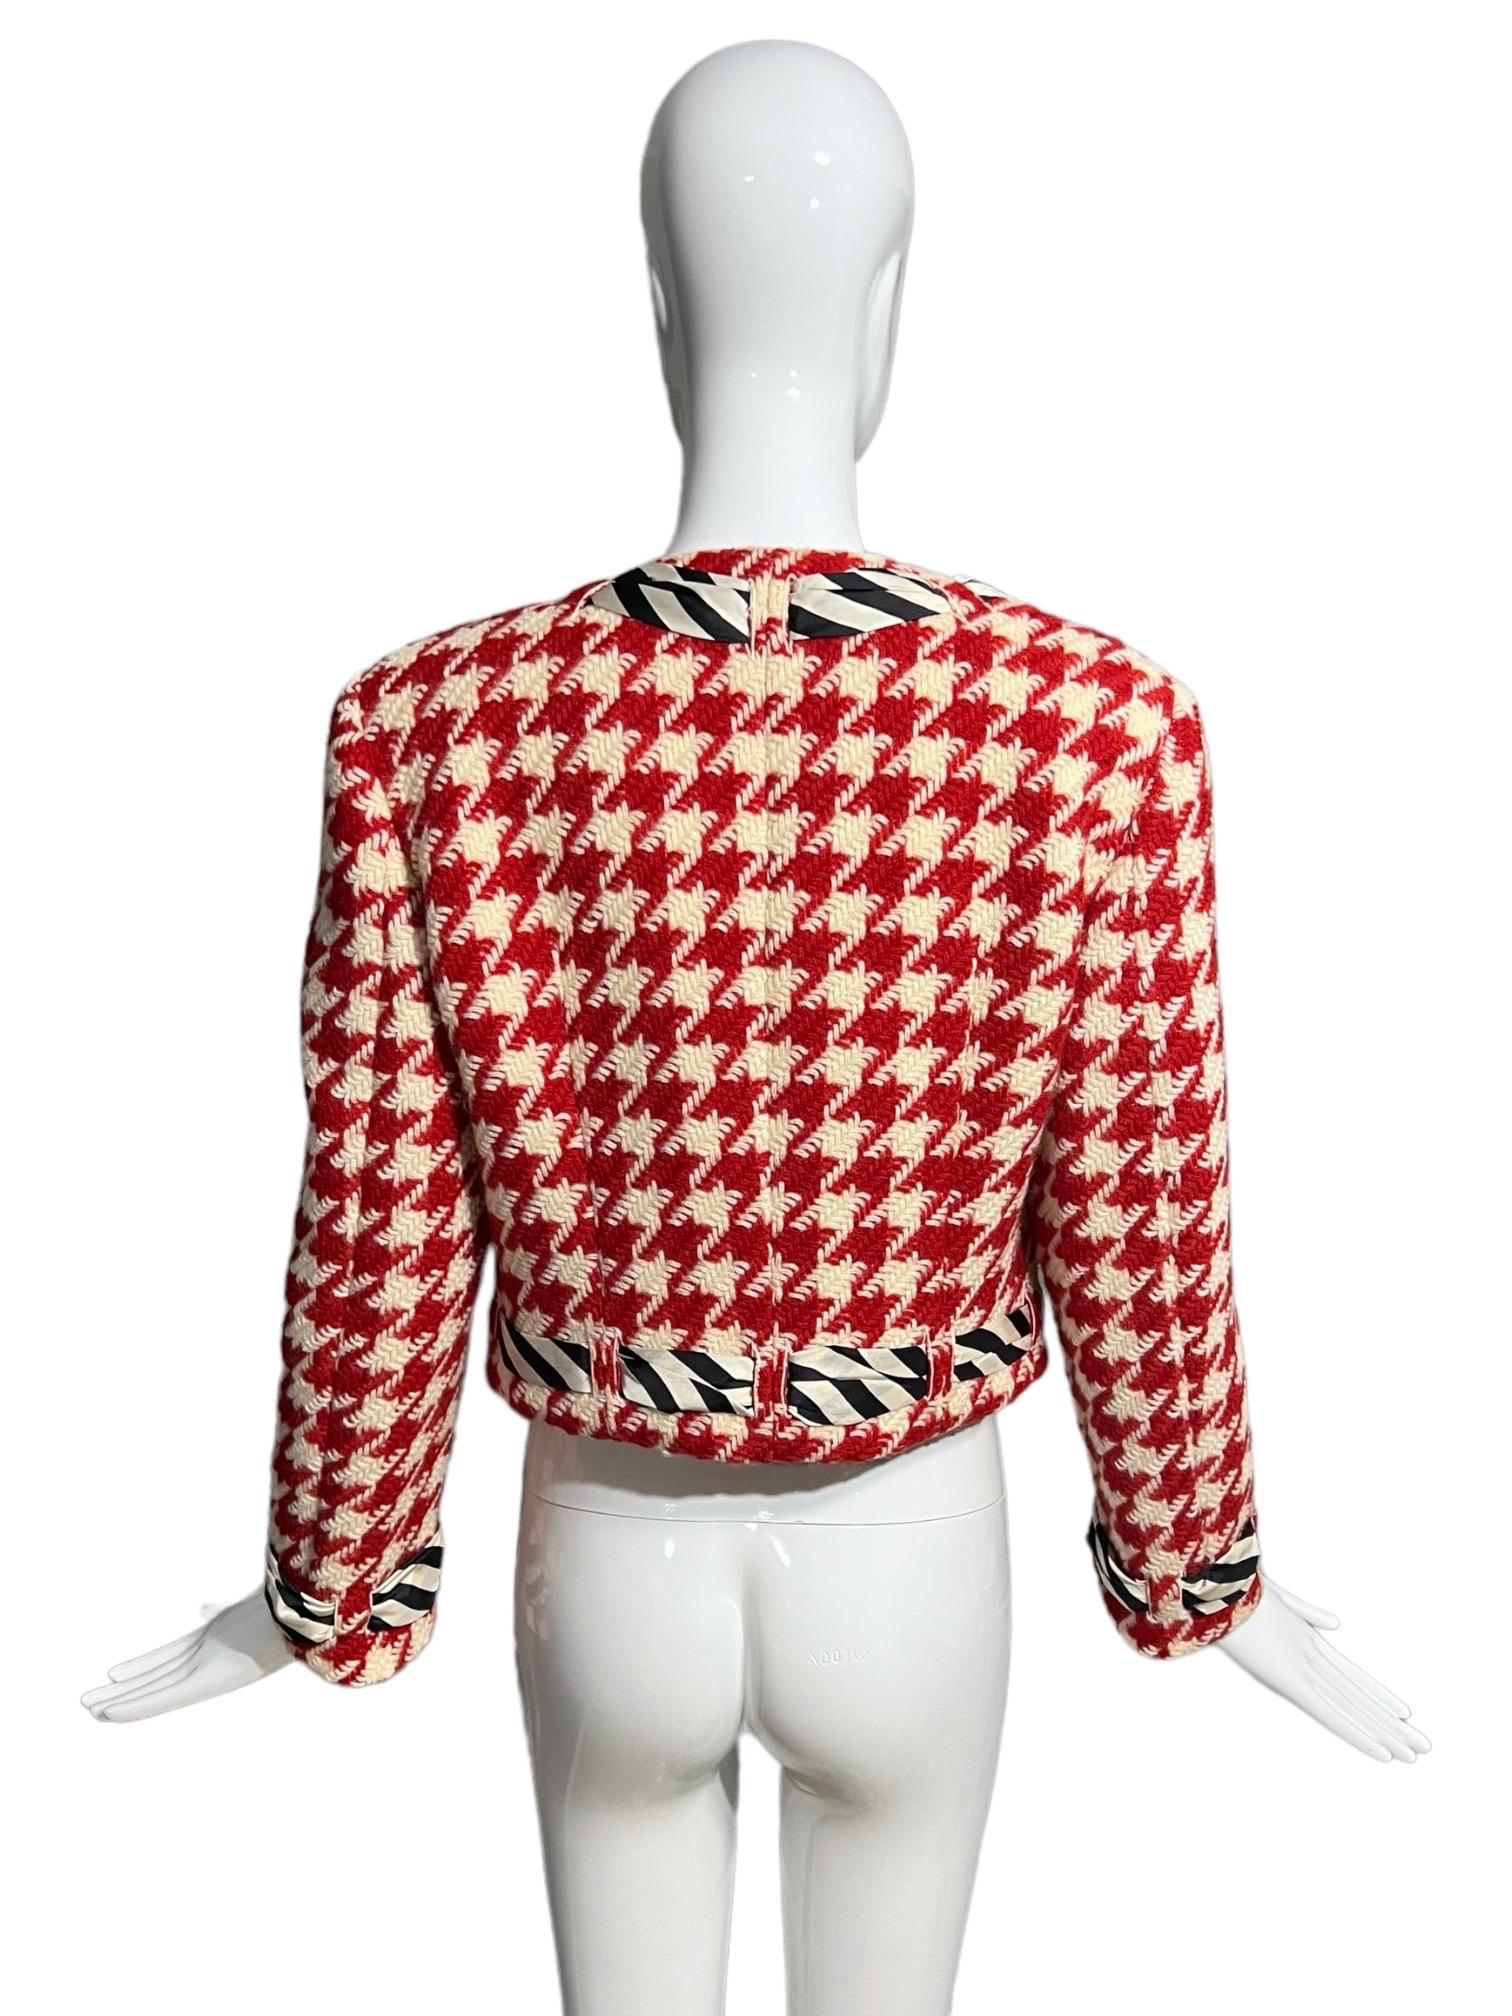 Moschino Cheap and Chic Vintage Houndstooth Jacket as seen on Princess Diana 1